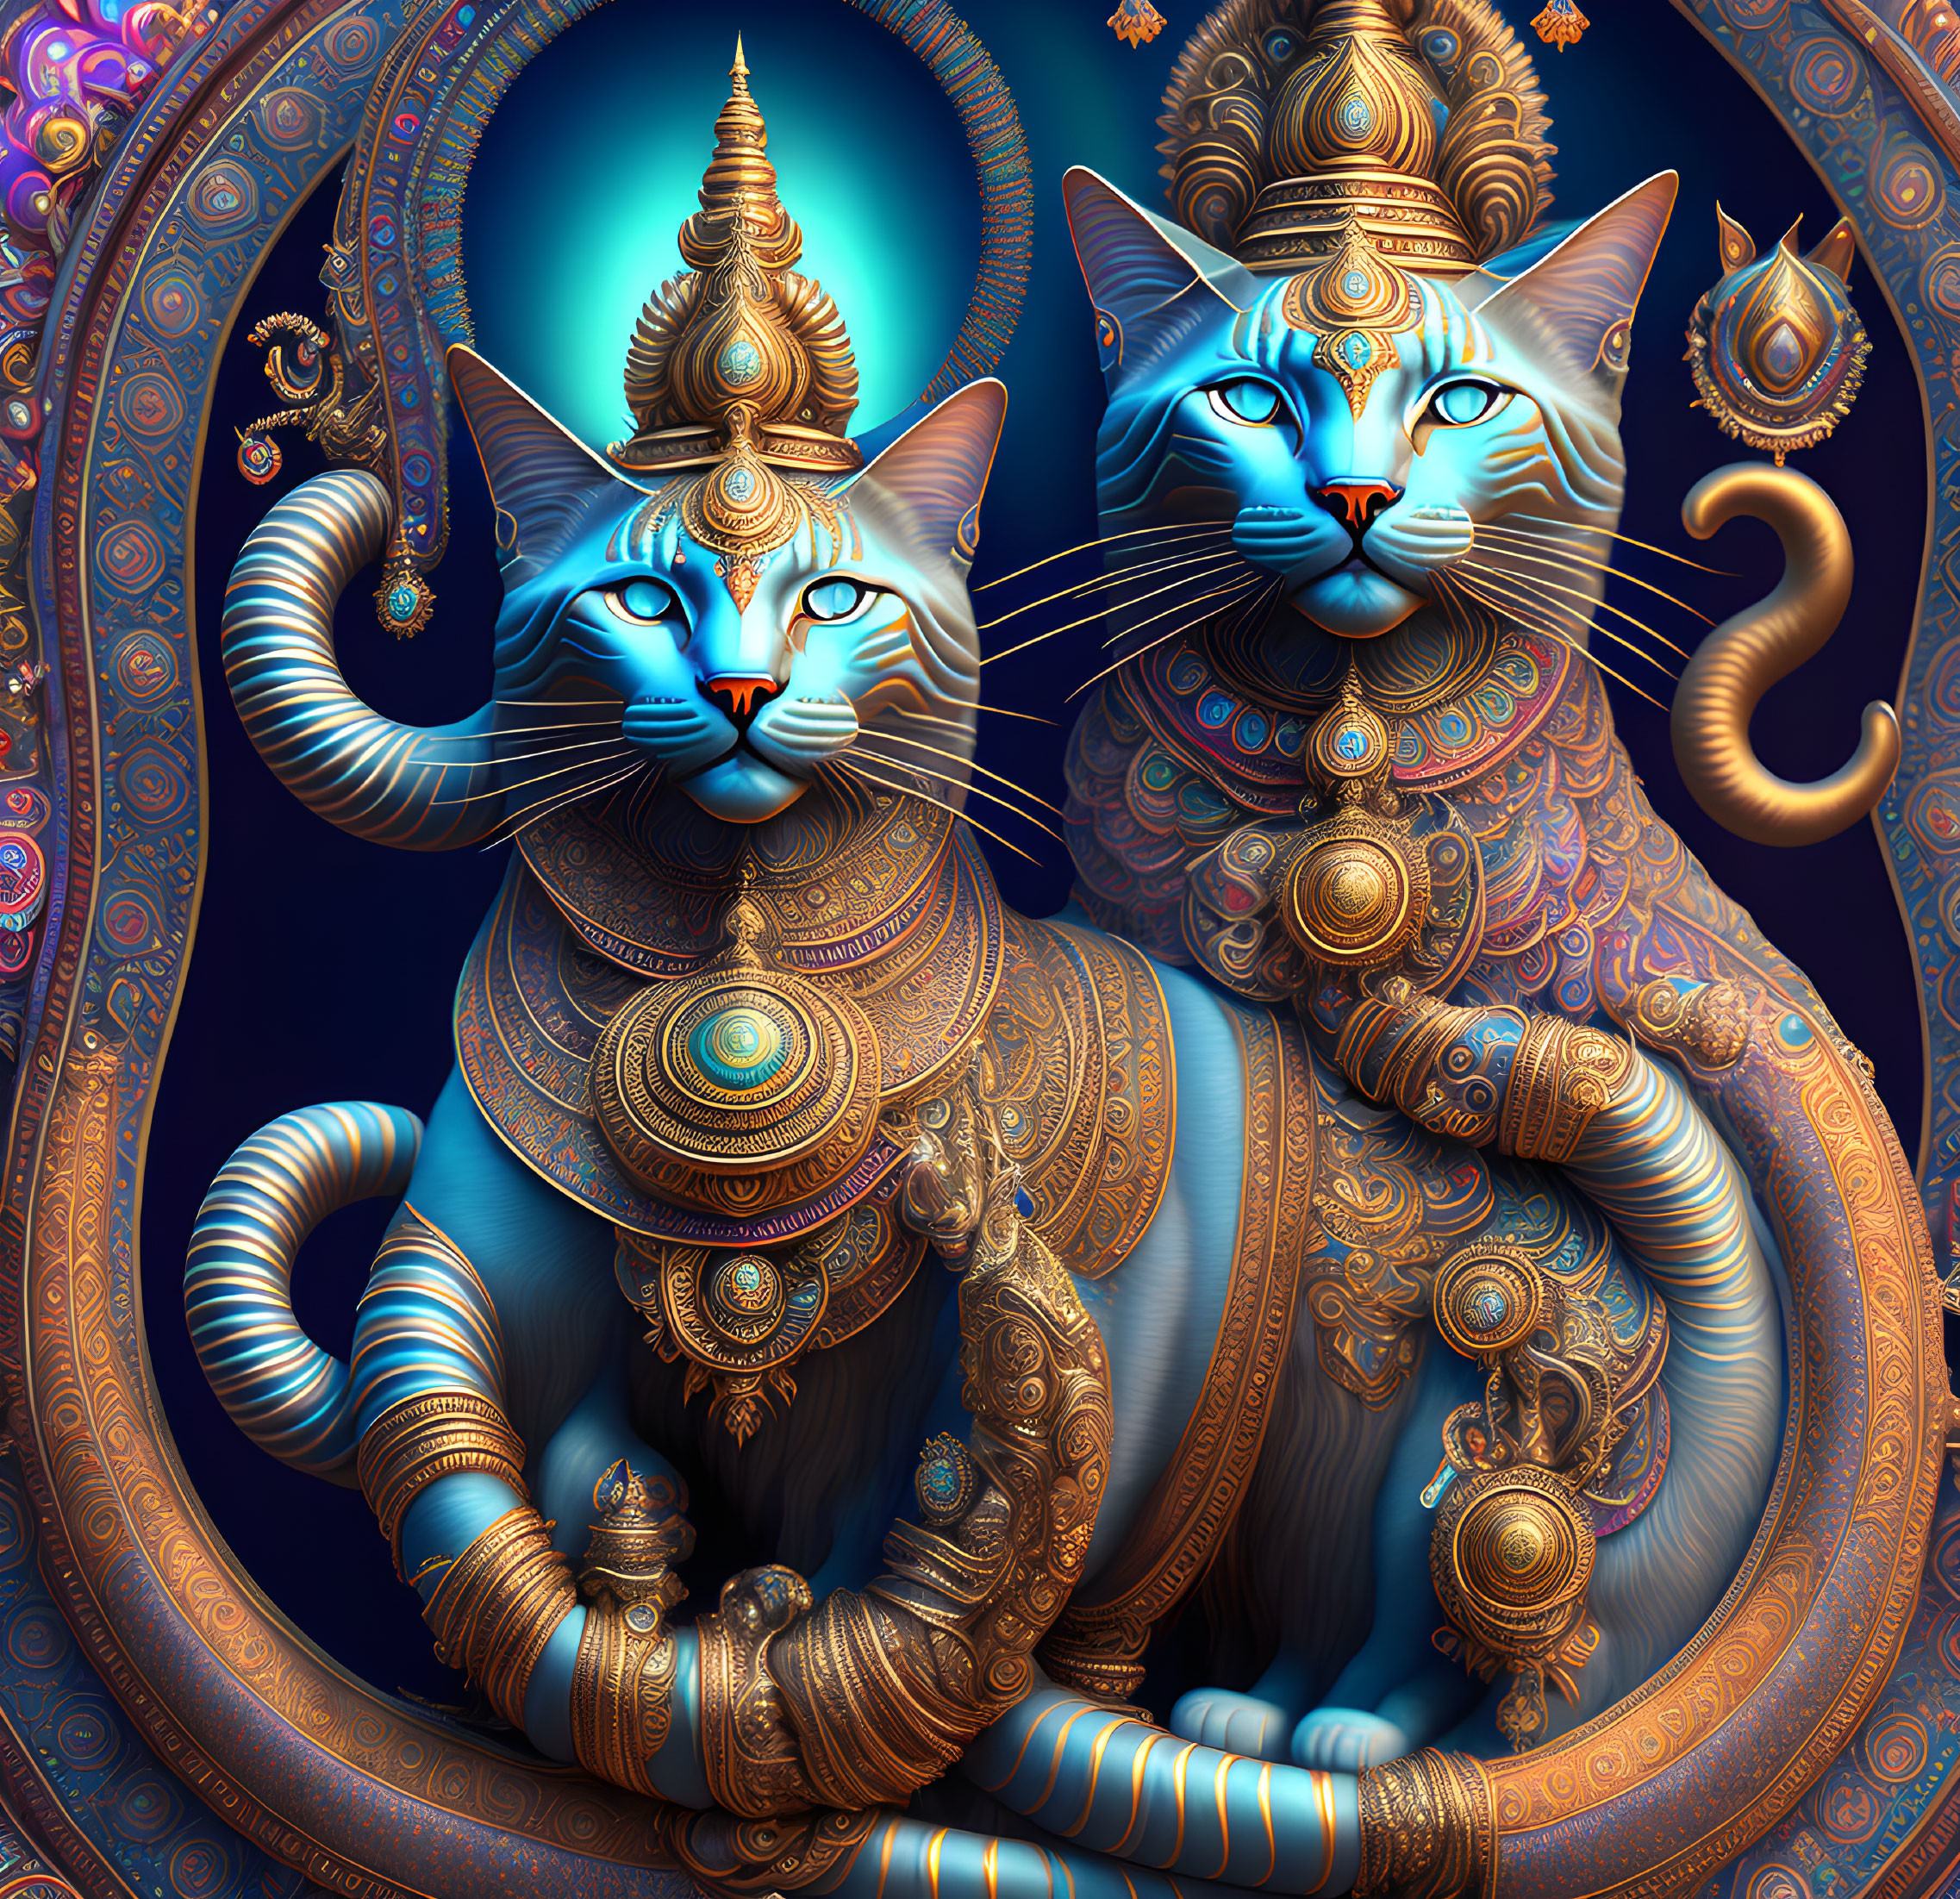 Stylized ornate blue cats with human-like eyes in digital art